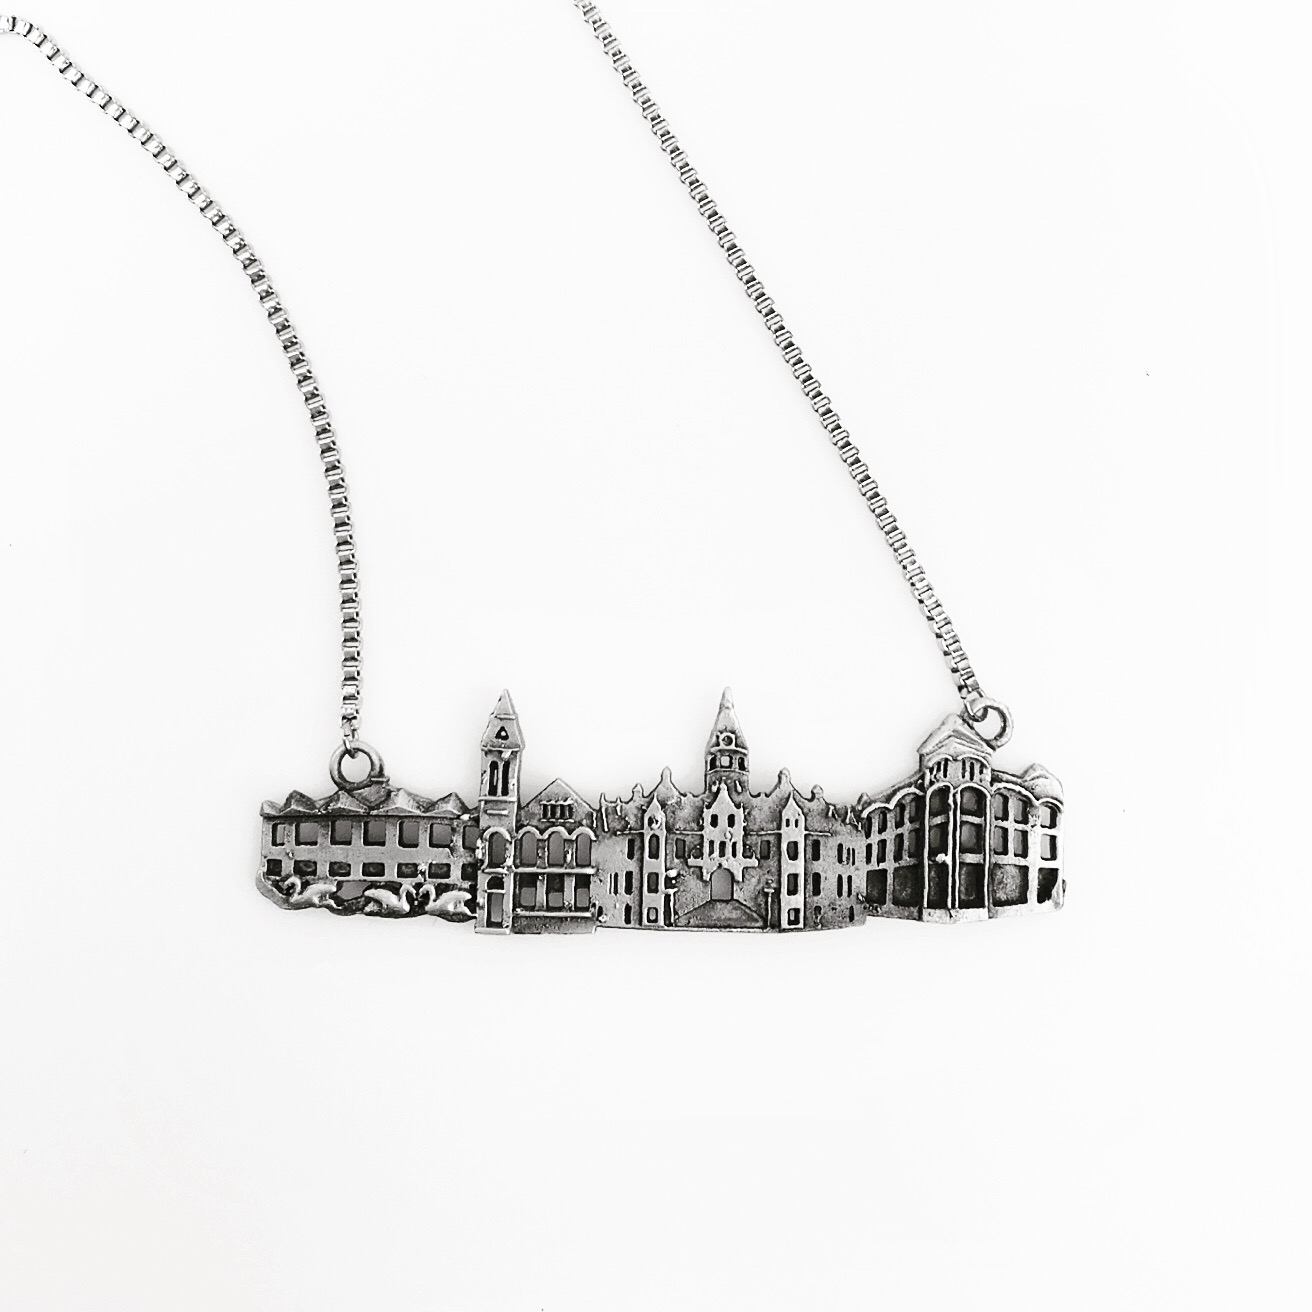 Streetscape Necklace